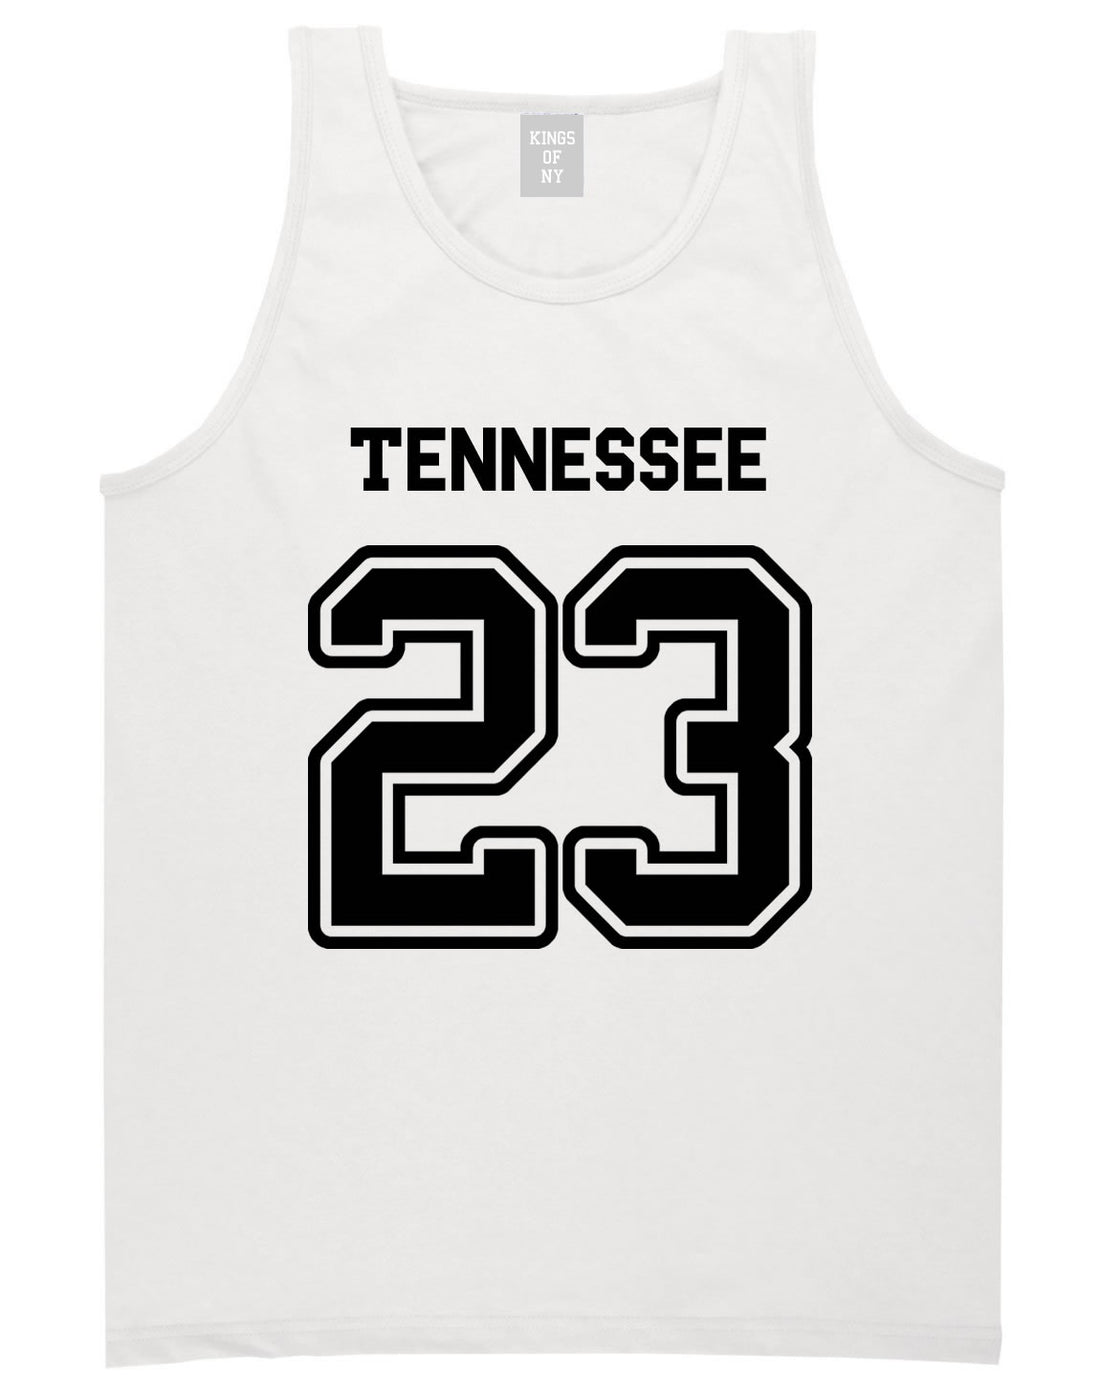 Sport Style Tennessee 23 Team State Jersey Mens Tank Top By Kings Of NY